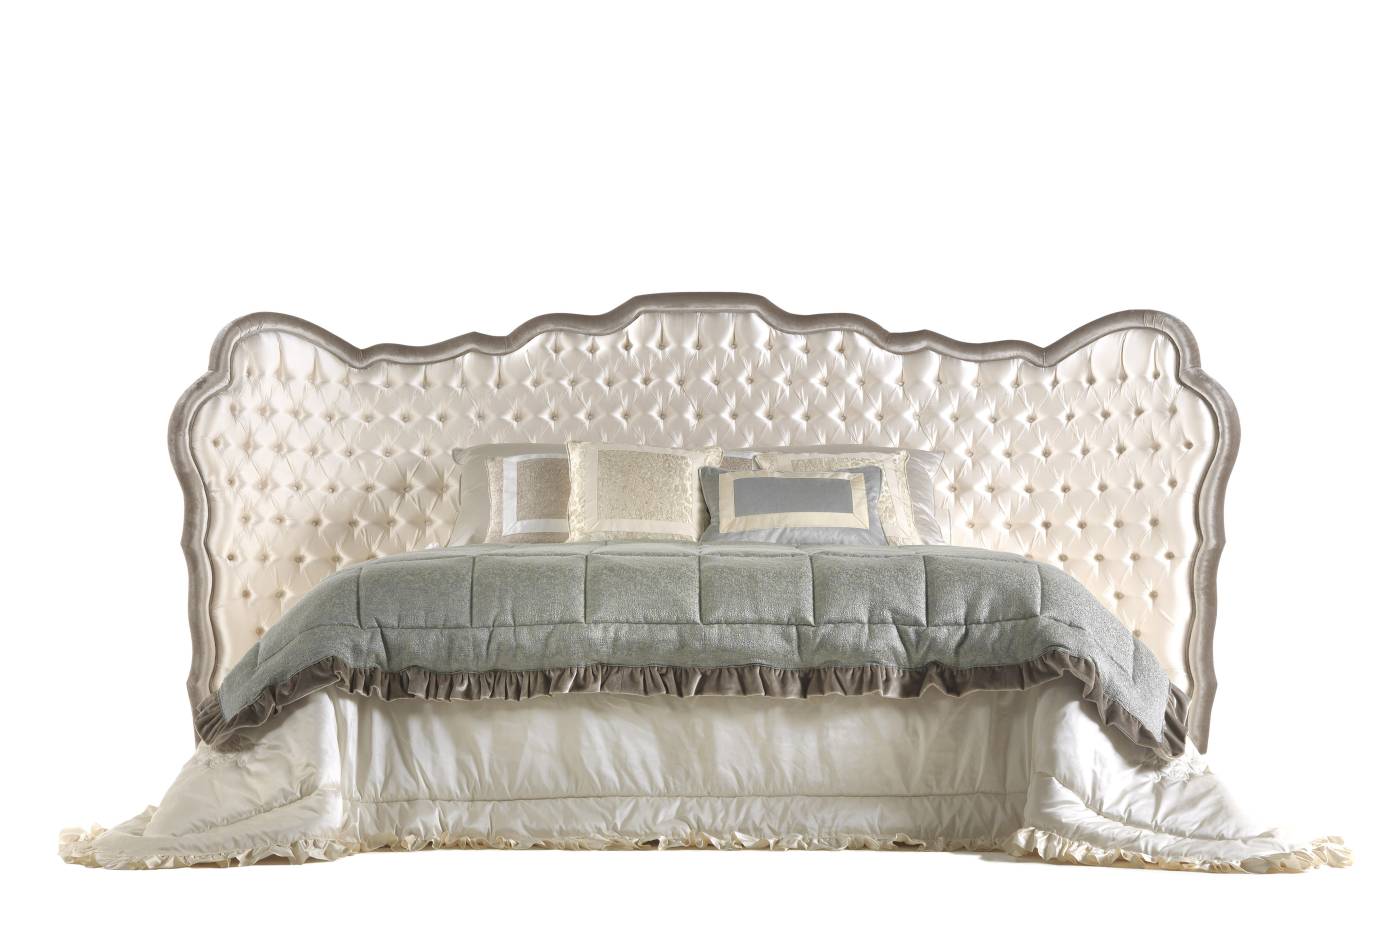 PLEASURE bed - Discover timeless elegance with Jumbo Collection's Italian luxury BEDS. 